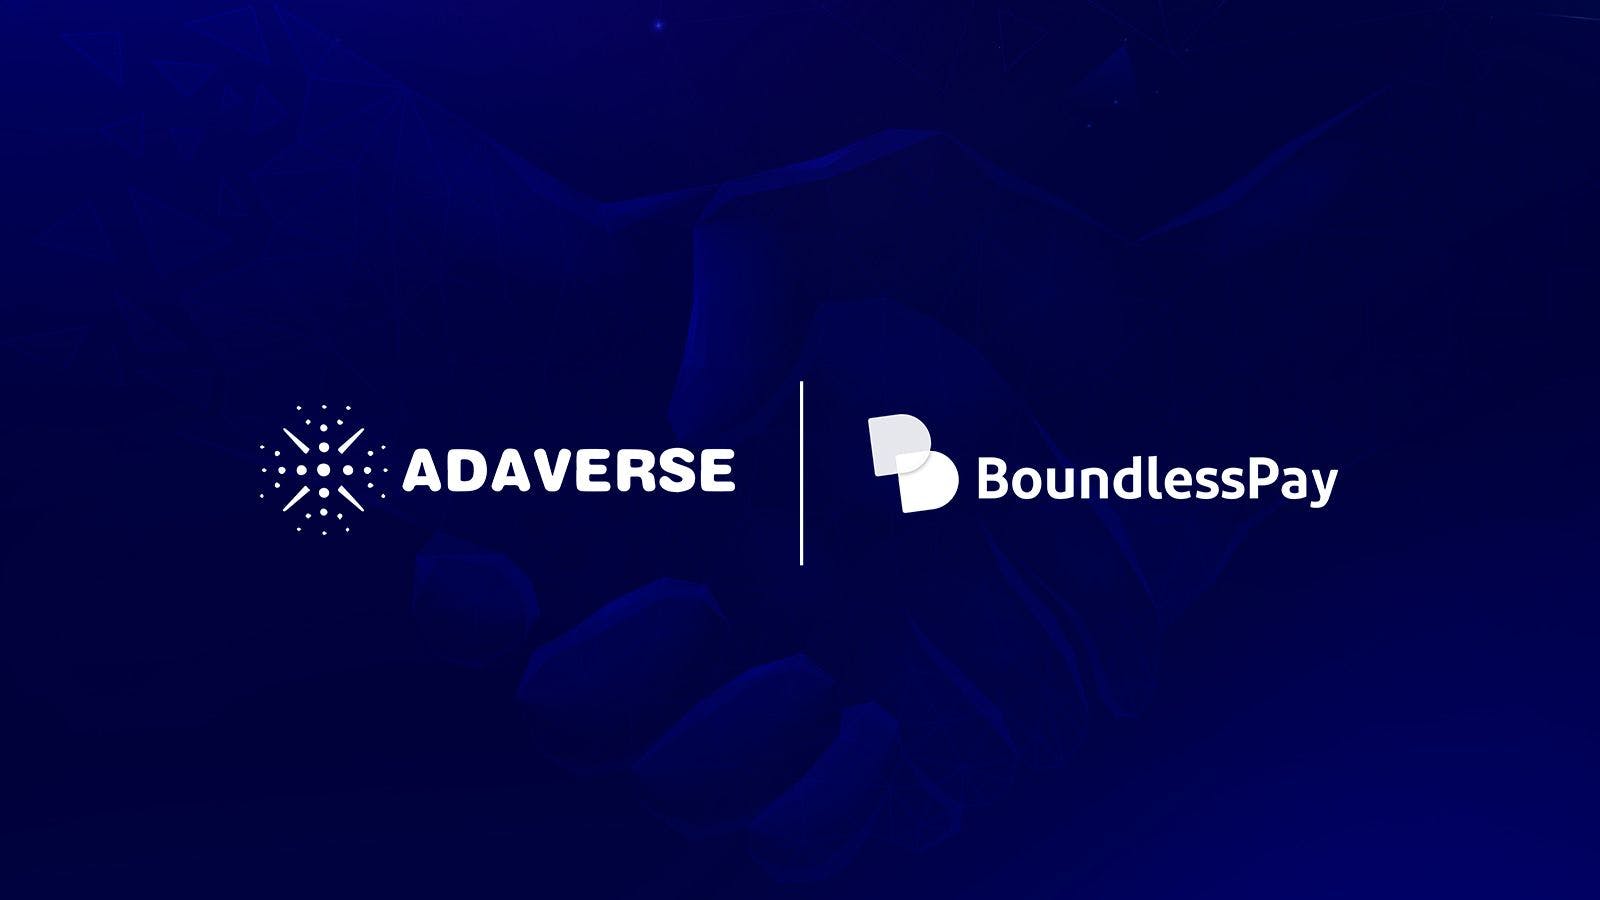 BoundlessPay Digital Banking Platform Receives Funding From EMURGO Africa’s Adaverse to Scale Cross-Border Payments on Cardano Blockchain